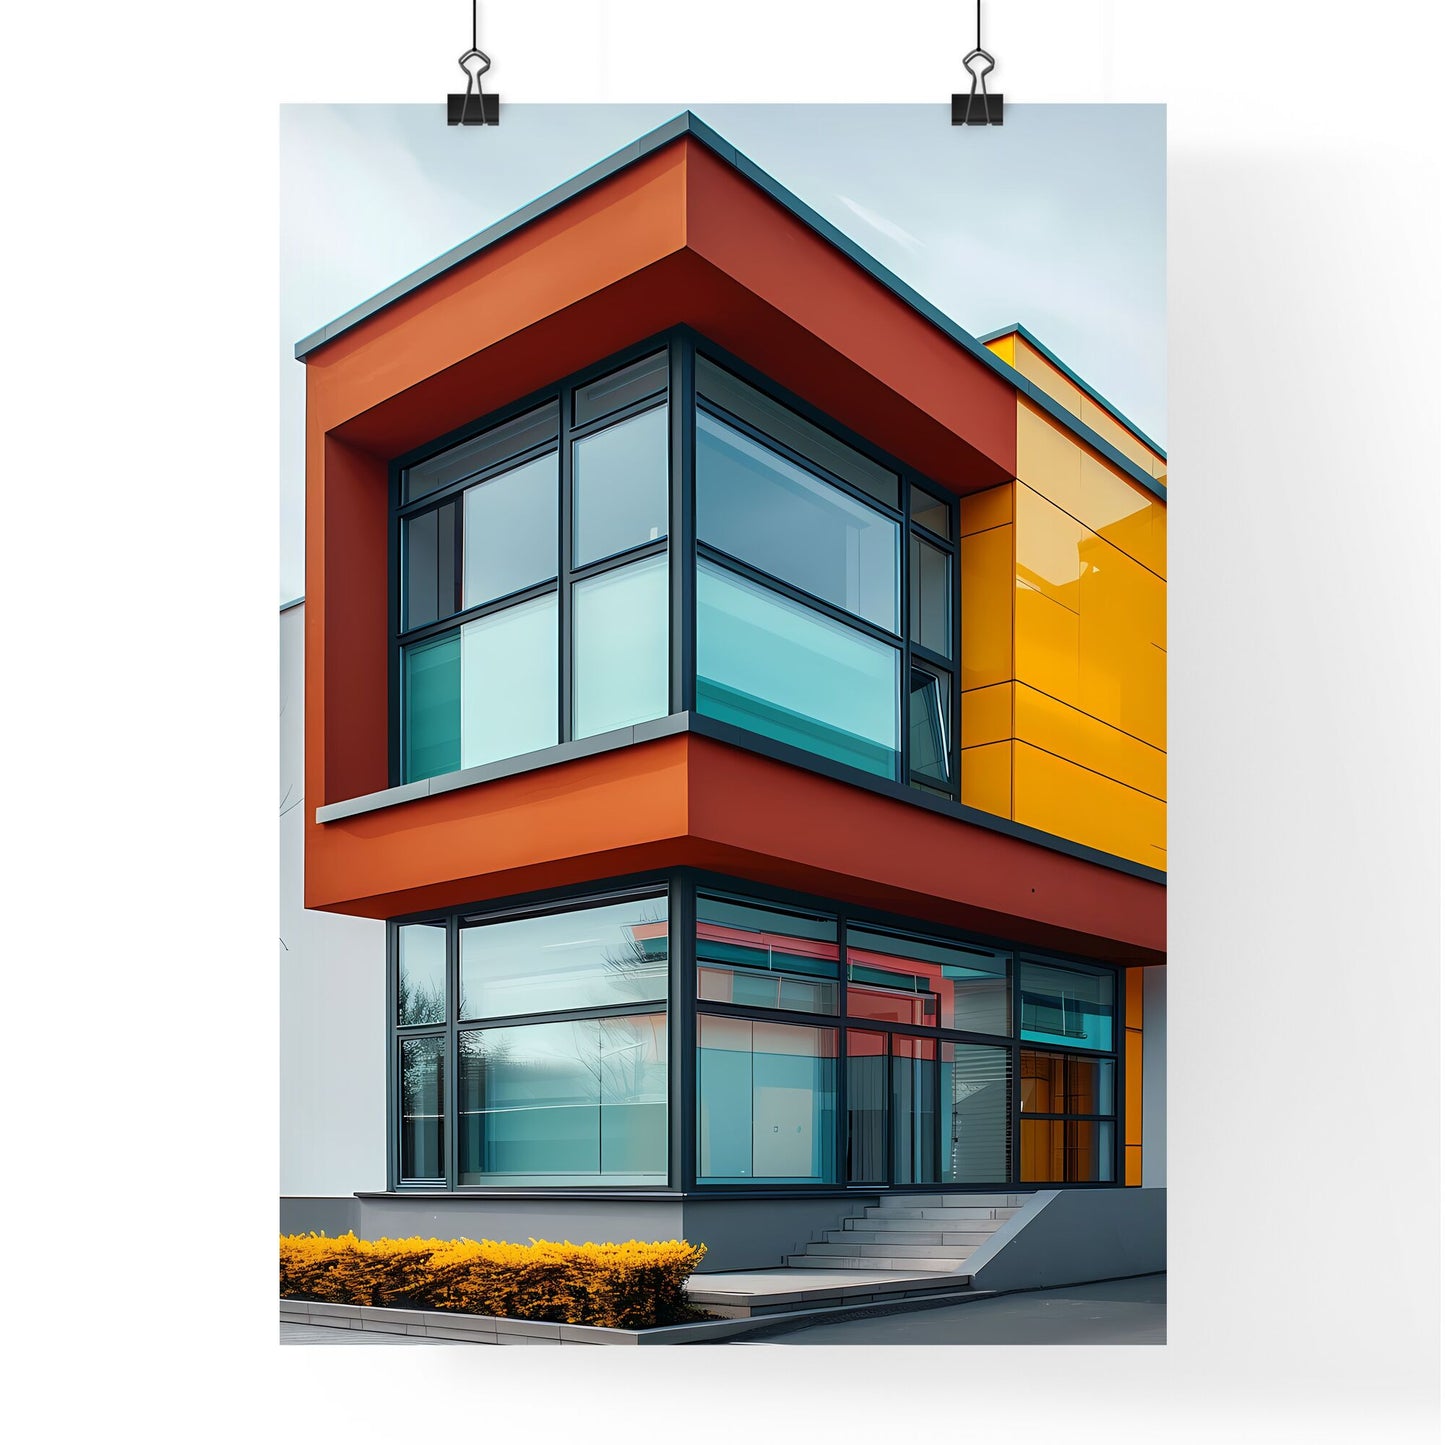 Vibrant Bauhaus Painting: Corner of a Geometric Architectural Masterpiece with Flat Minimalist Style and Bright Colors Default Title